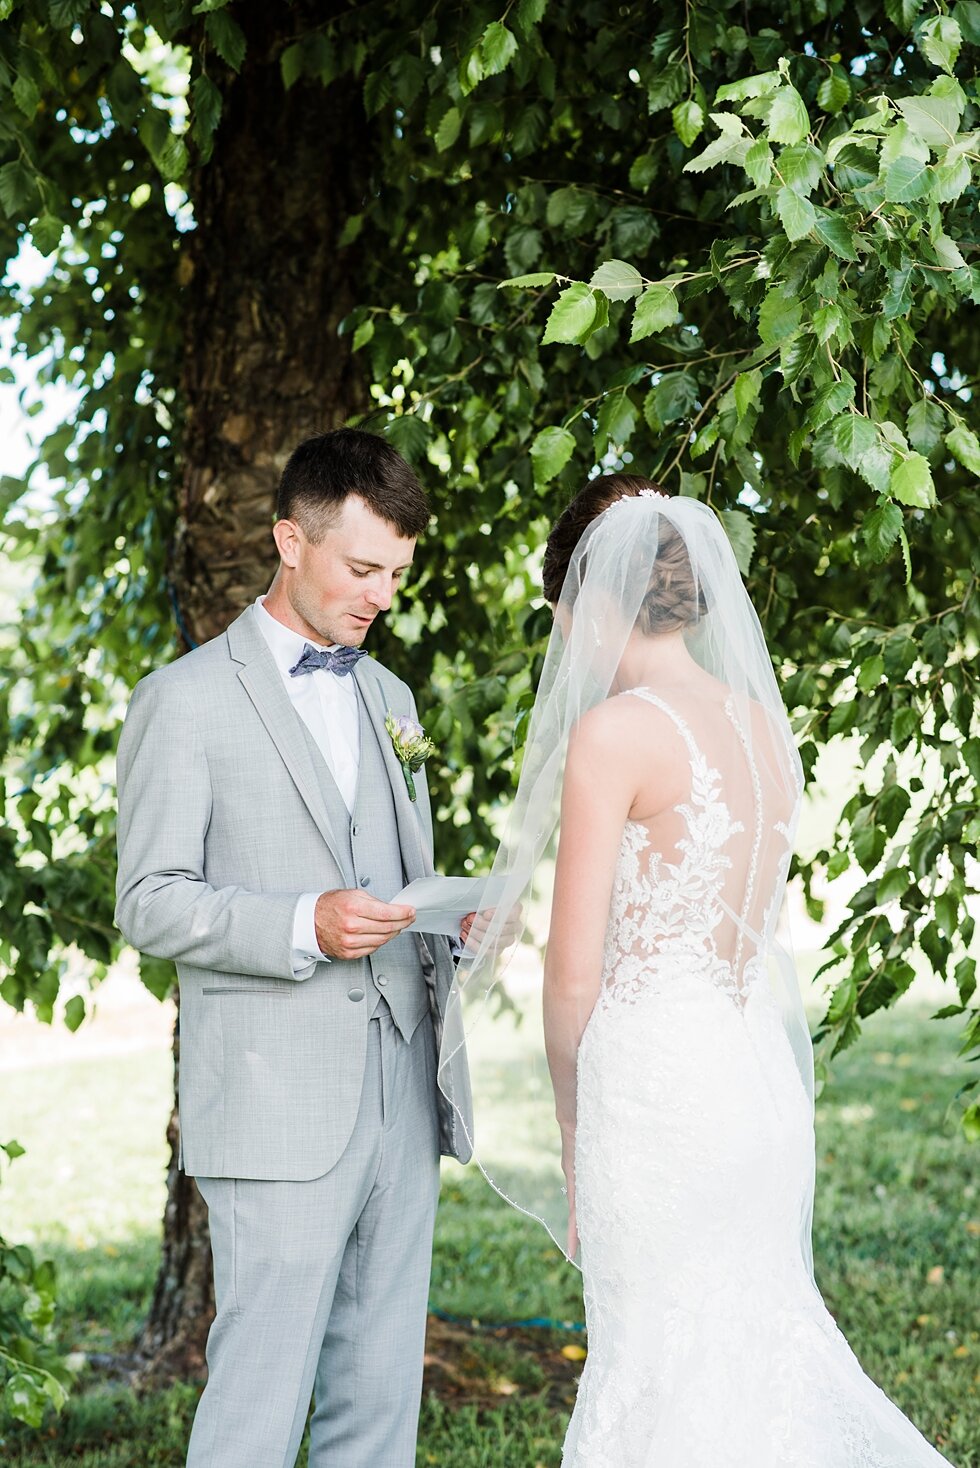  Emotional moment shared between the bride and groom before their wedding ceremony with the greenery in the background. wedding ceremony details stunning photography married midwest louisville kentucky #weddingphoto #love #justmarried #midwestphotogr